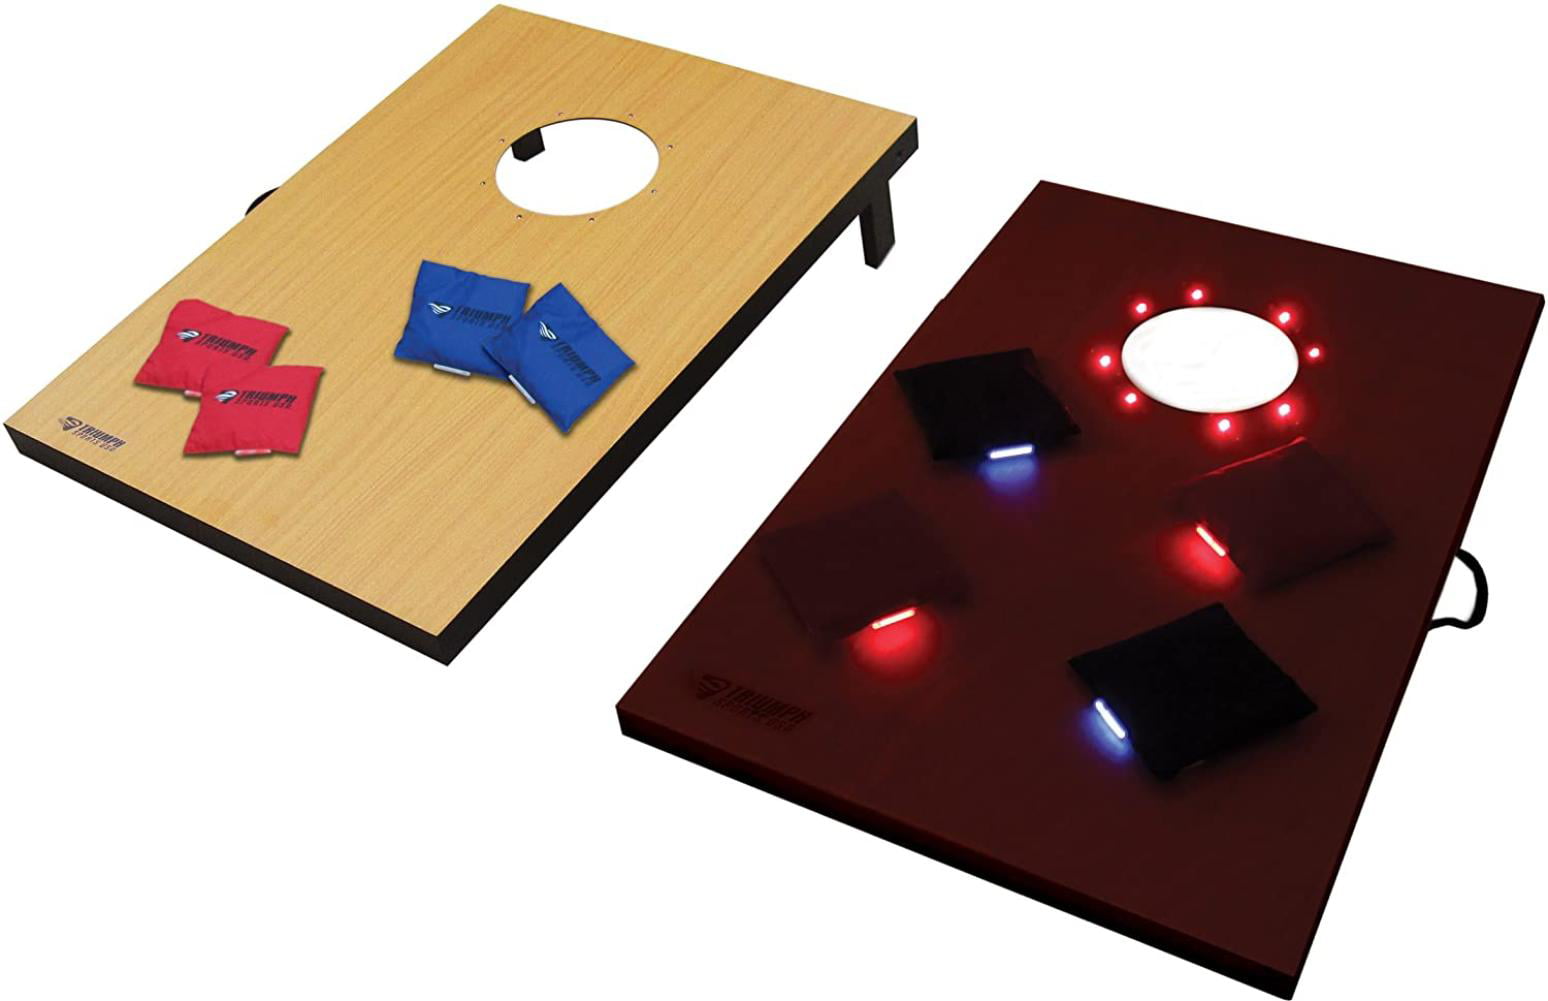 Details about   Triumph LED Lighted Cornhole Set Includes Two Lighted Cornhole Boards and Eigh 